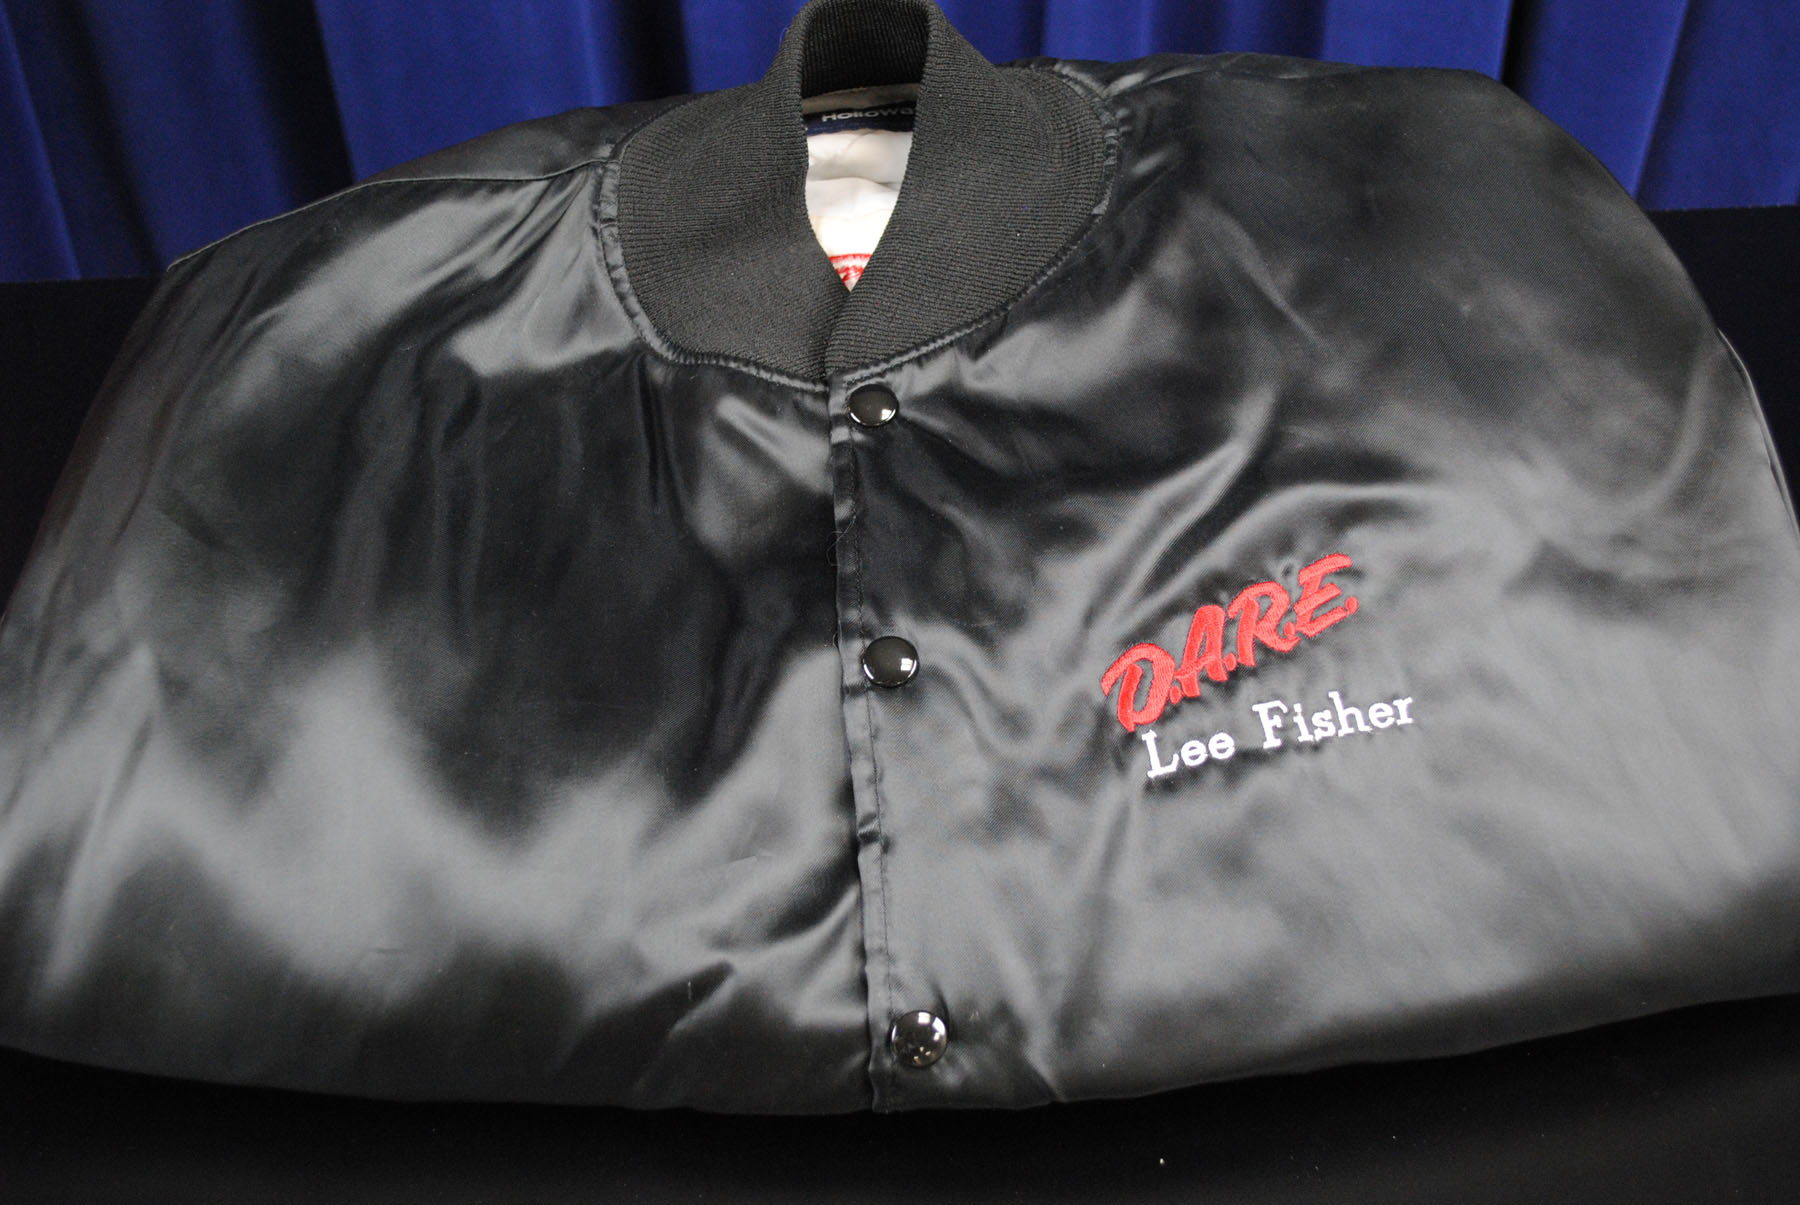 Attorney General Lee Fisher's DARE Jacket  